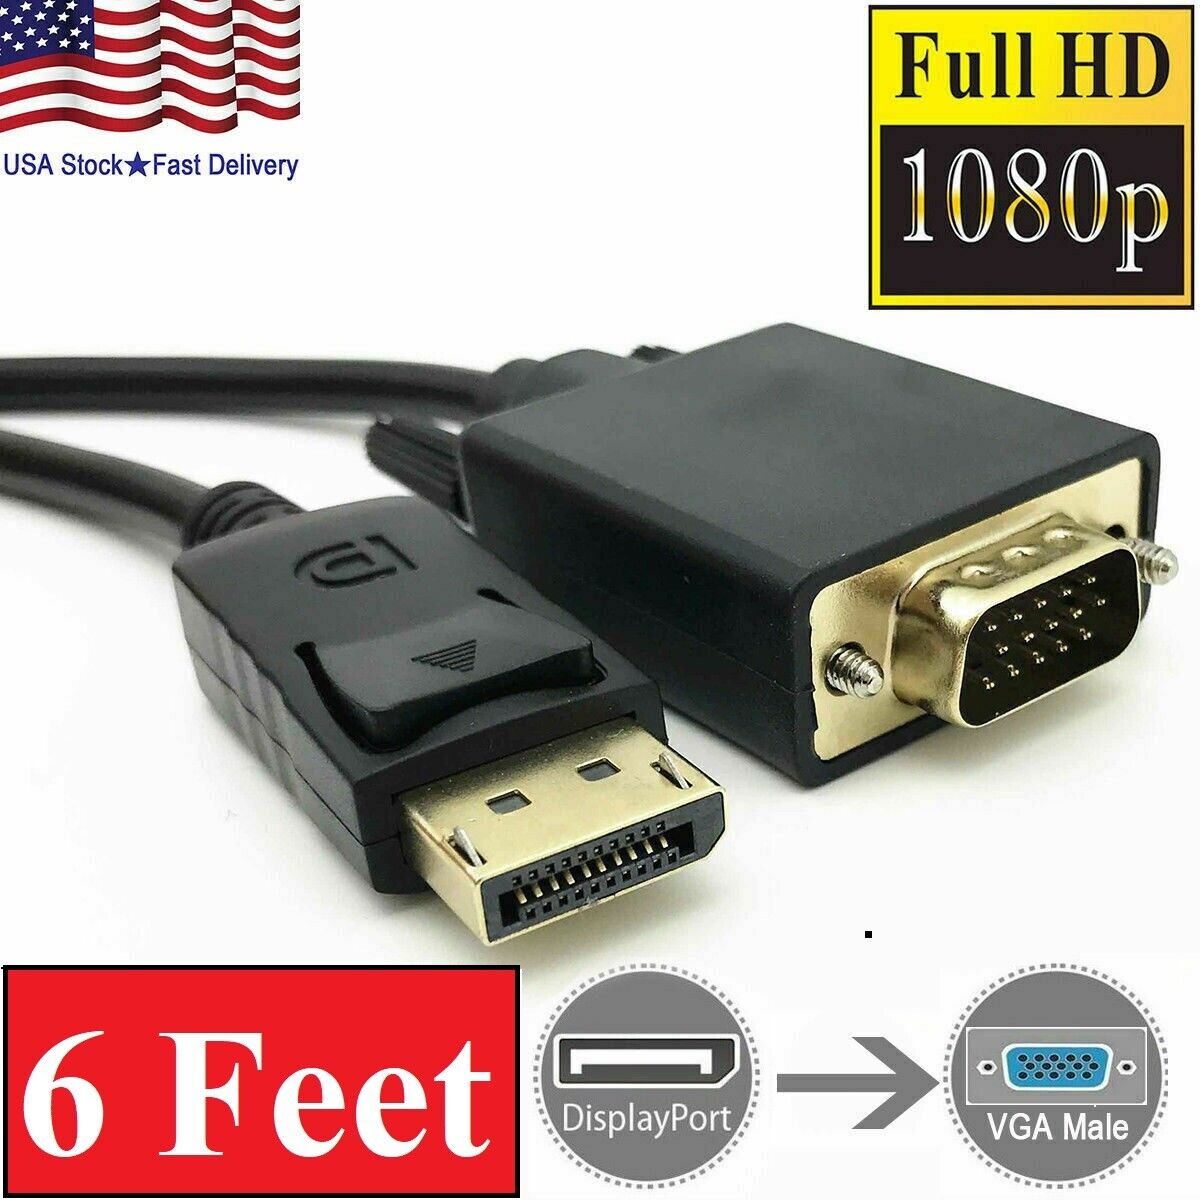 6 Feet Gold Plated DisplayPort DP Male to VGA Male Cable Cord For Lenovo Dell HP